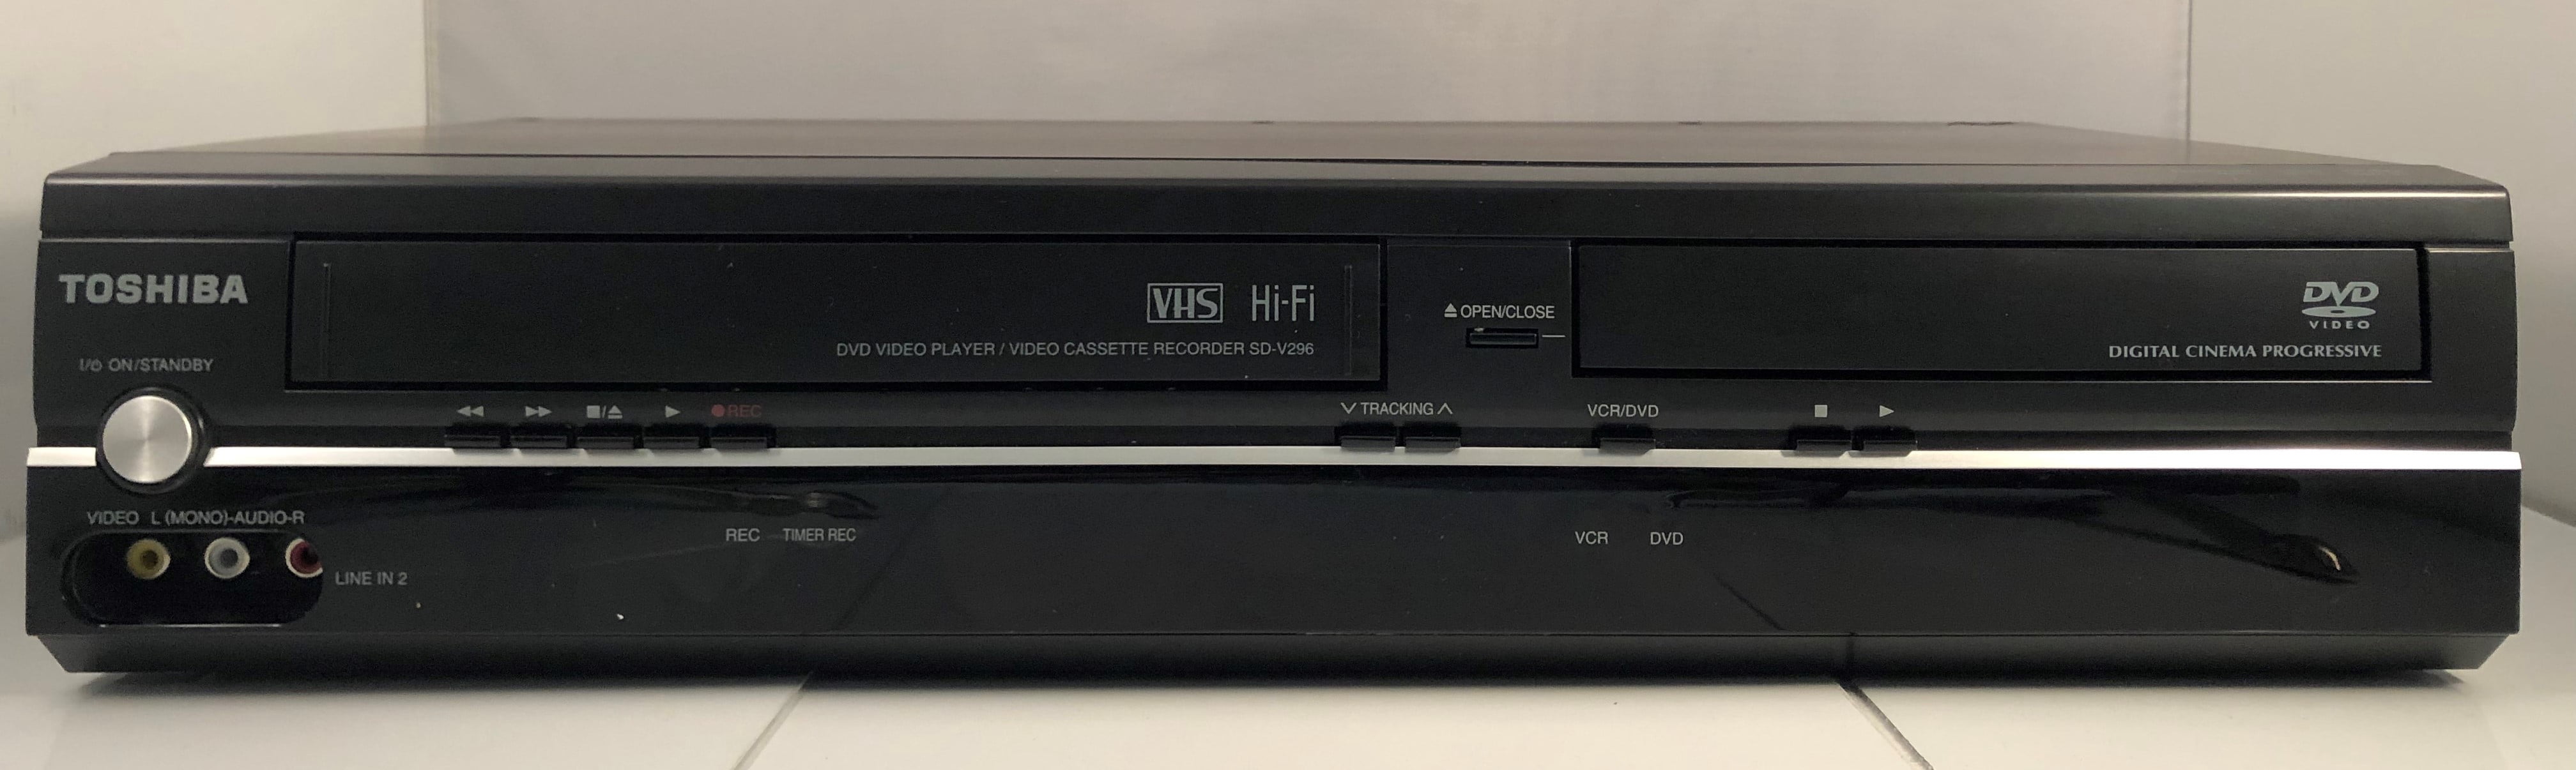 Toshiba SDV32K DVD Player/VCR Combo (REFURBISHED) with Remote, Manual